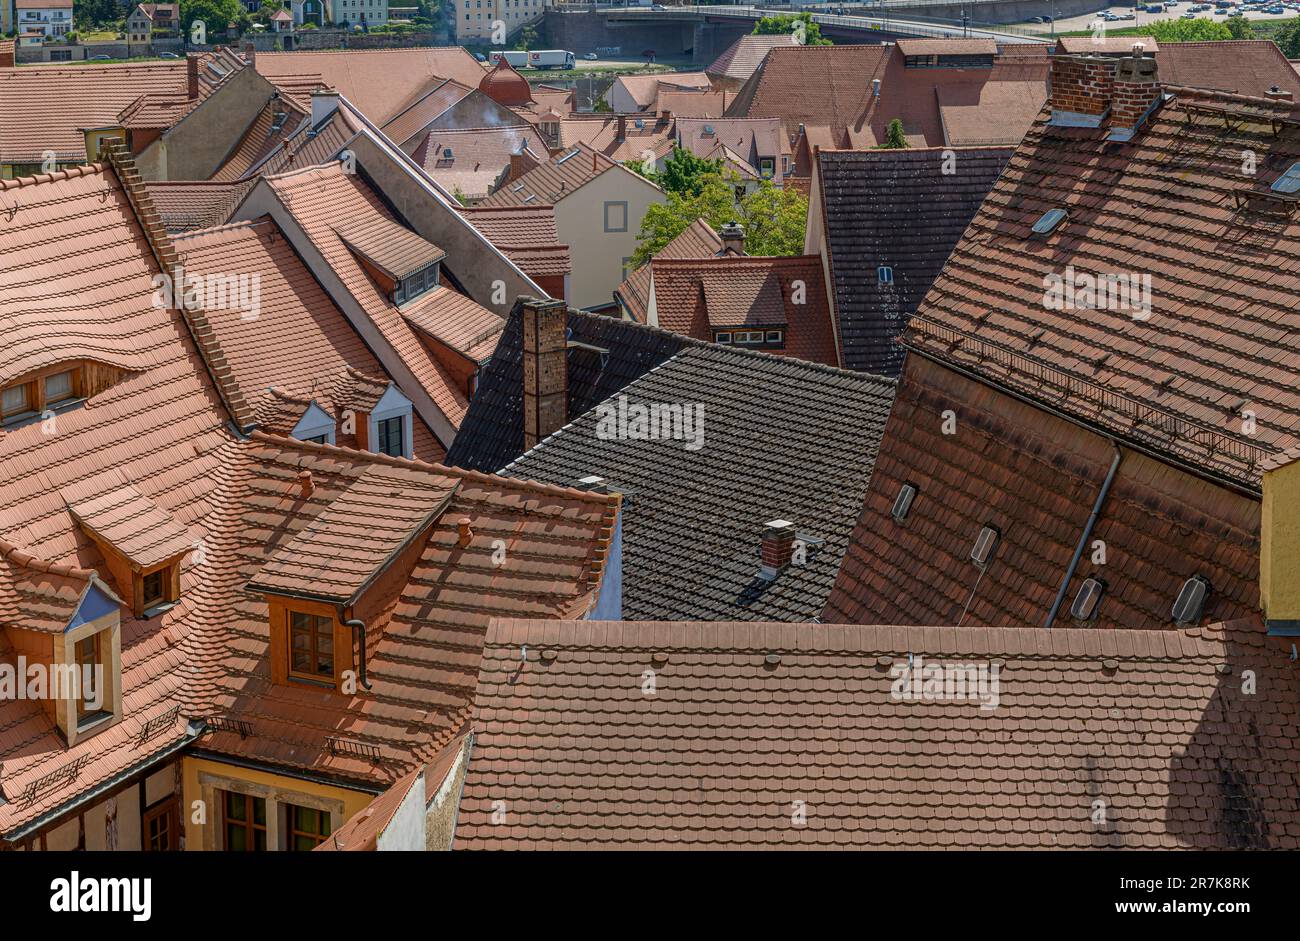 High over the rooftops of the beautiful town of Meissen near Dresden in Germany. Nearly all the roofs are the same perfect terracotta. Stock Photo